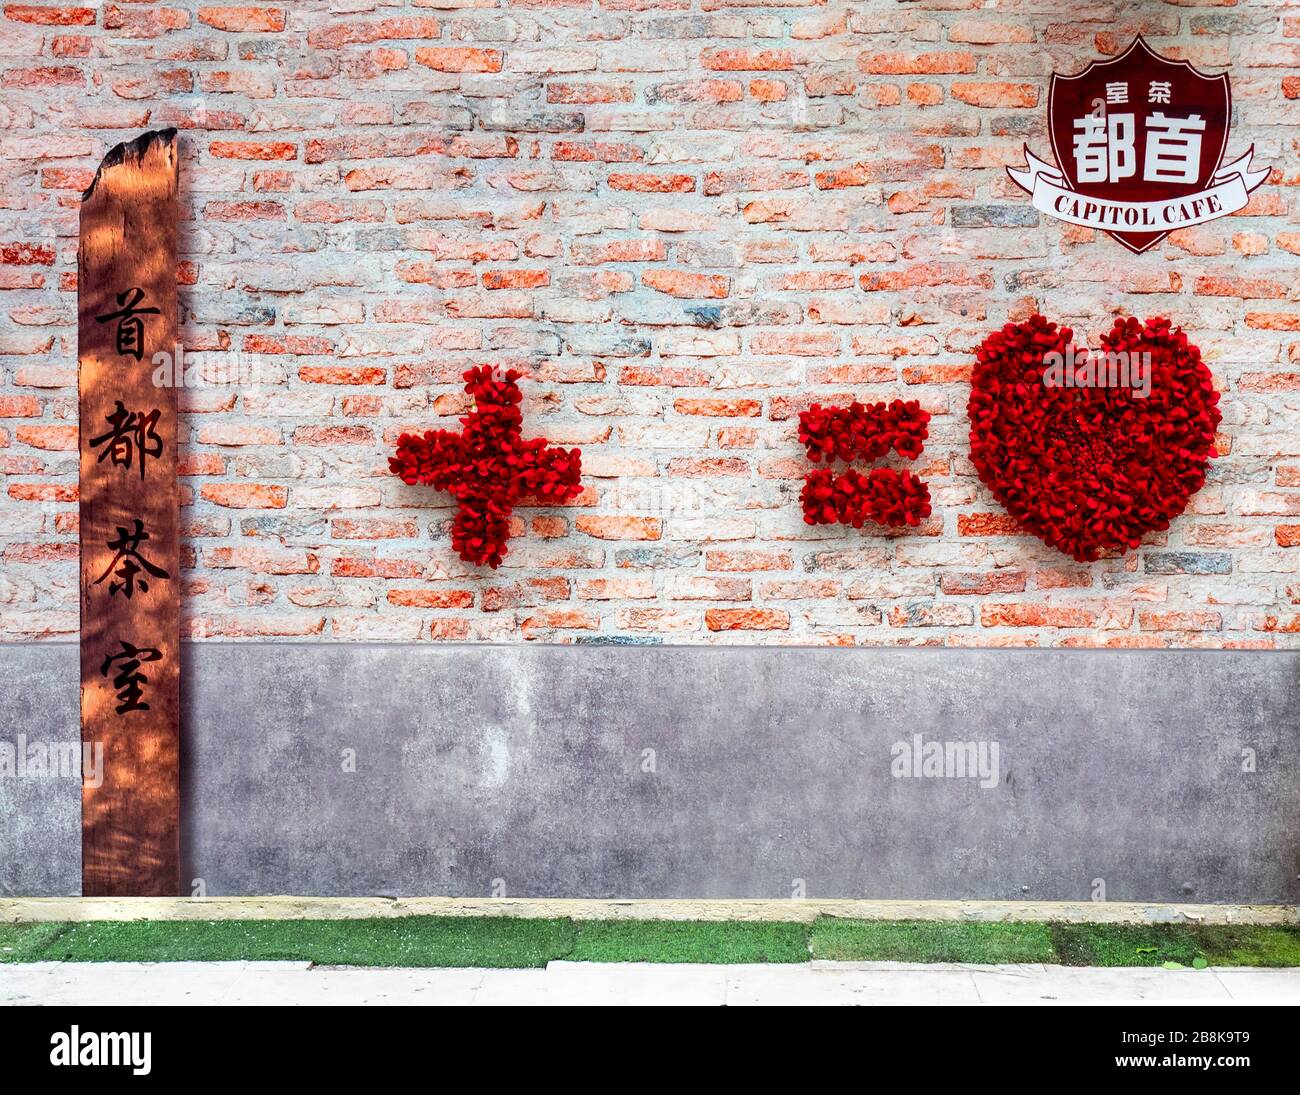 Capitol Cafe courtyard red brick wall red petals and copper signage giving homage to Chinese homage Bukit Bintang Kuala Lumpur Malaysia. Stock Photo